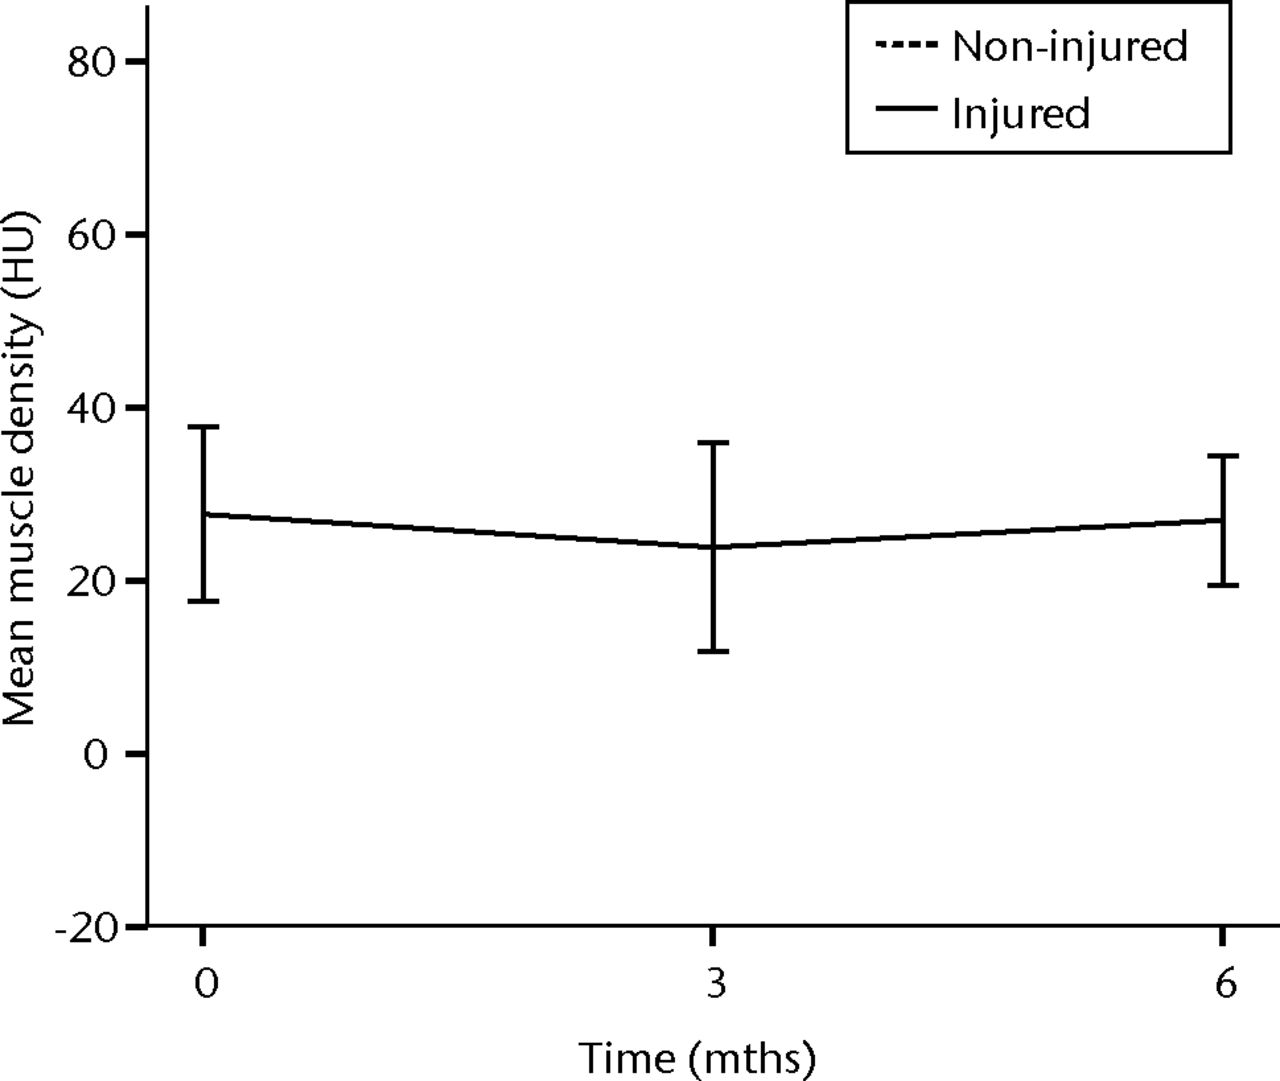 Figs. 1a - 1b 
          Graphs showing the mean muscle density
(MMD) of the injured and non-injured biceps a) and triceps b) muscle
pre-transplantation and at three and six months follow-up for the
total patient group. Error bars denote 95% confidence interval (HU,
Hounsfield unit).
        